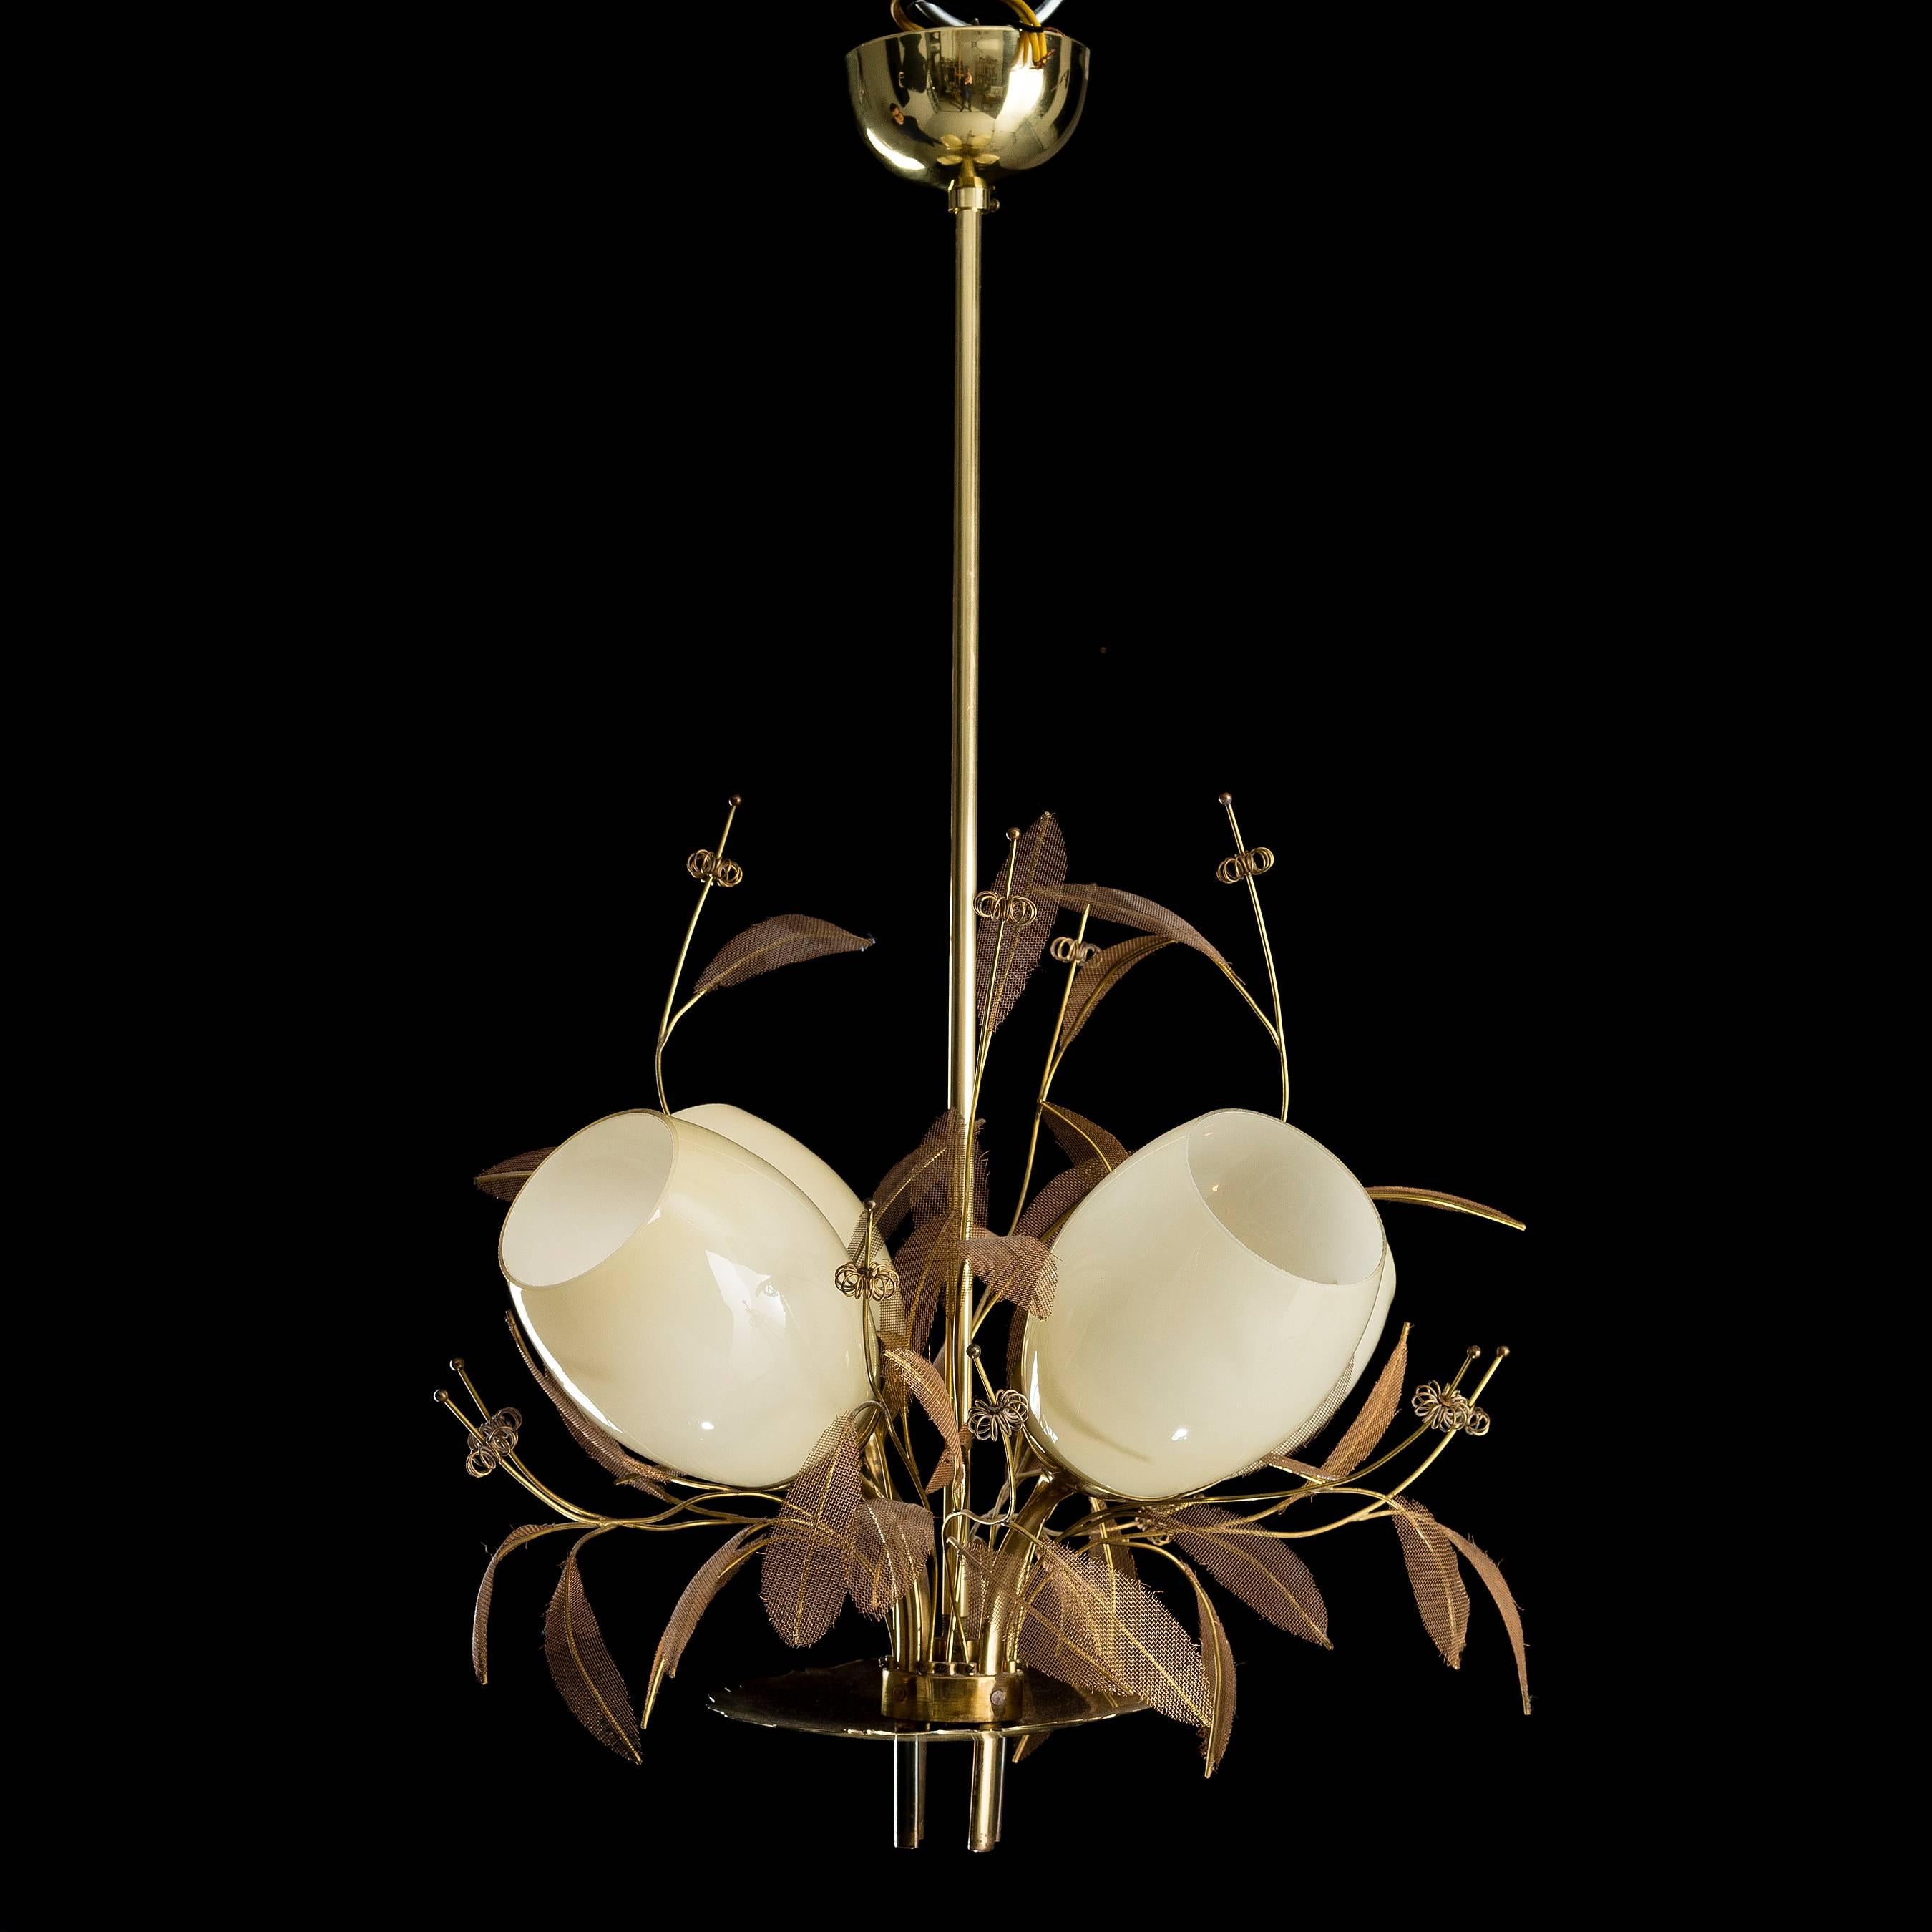 A Paavo Tynell ceiling lamp, model 9029/4, manufactured by Taito Oy in the early 1950s. Four gold guilder glass shades, solid brass, metal and metal mesh.
Stamped "TAITO AB 9029."
Measures: Length 70 cm and width 54 cm.
Excellent